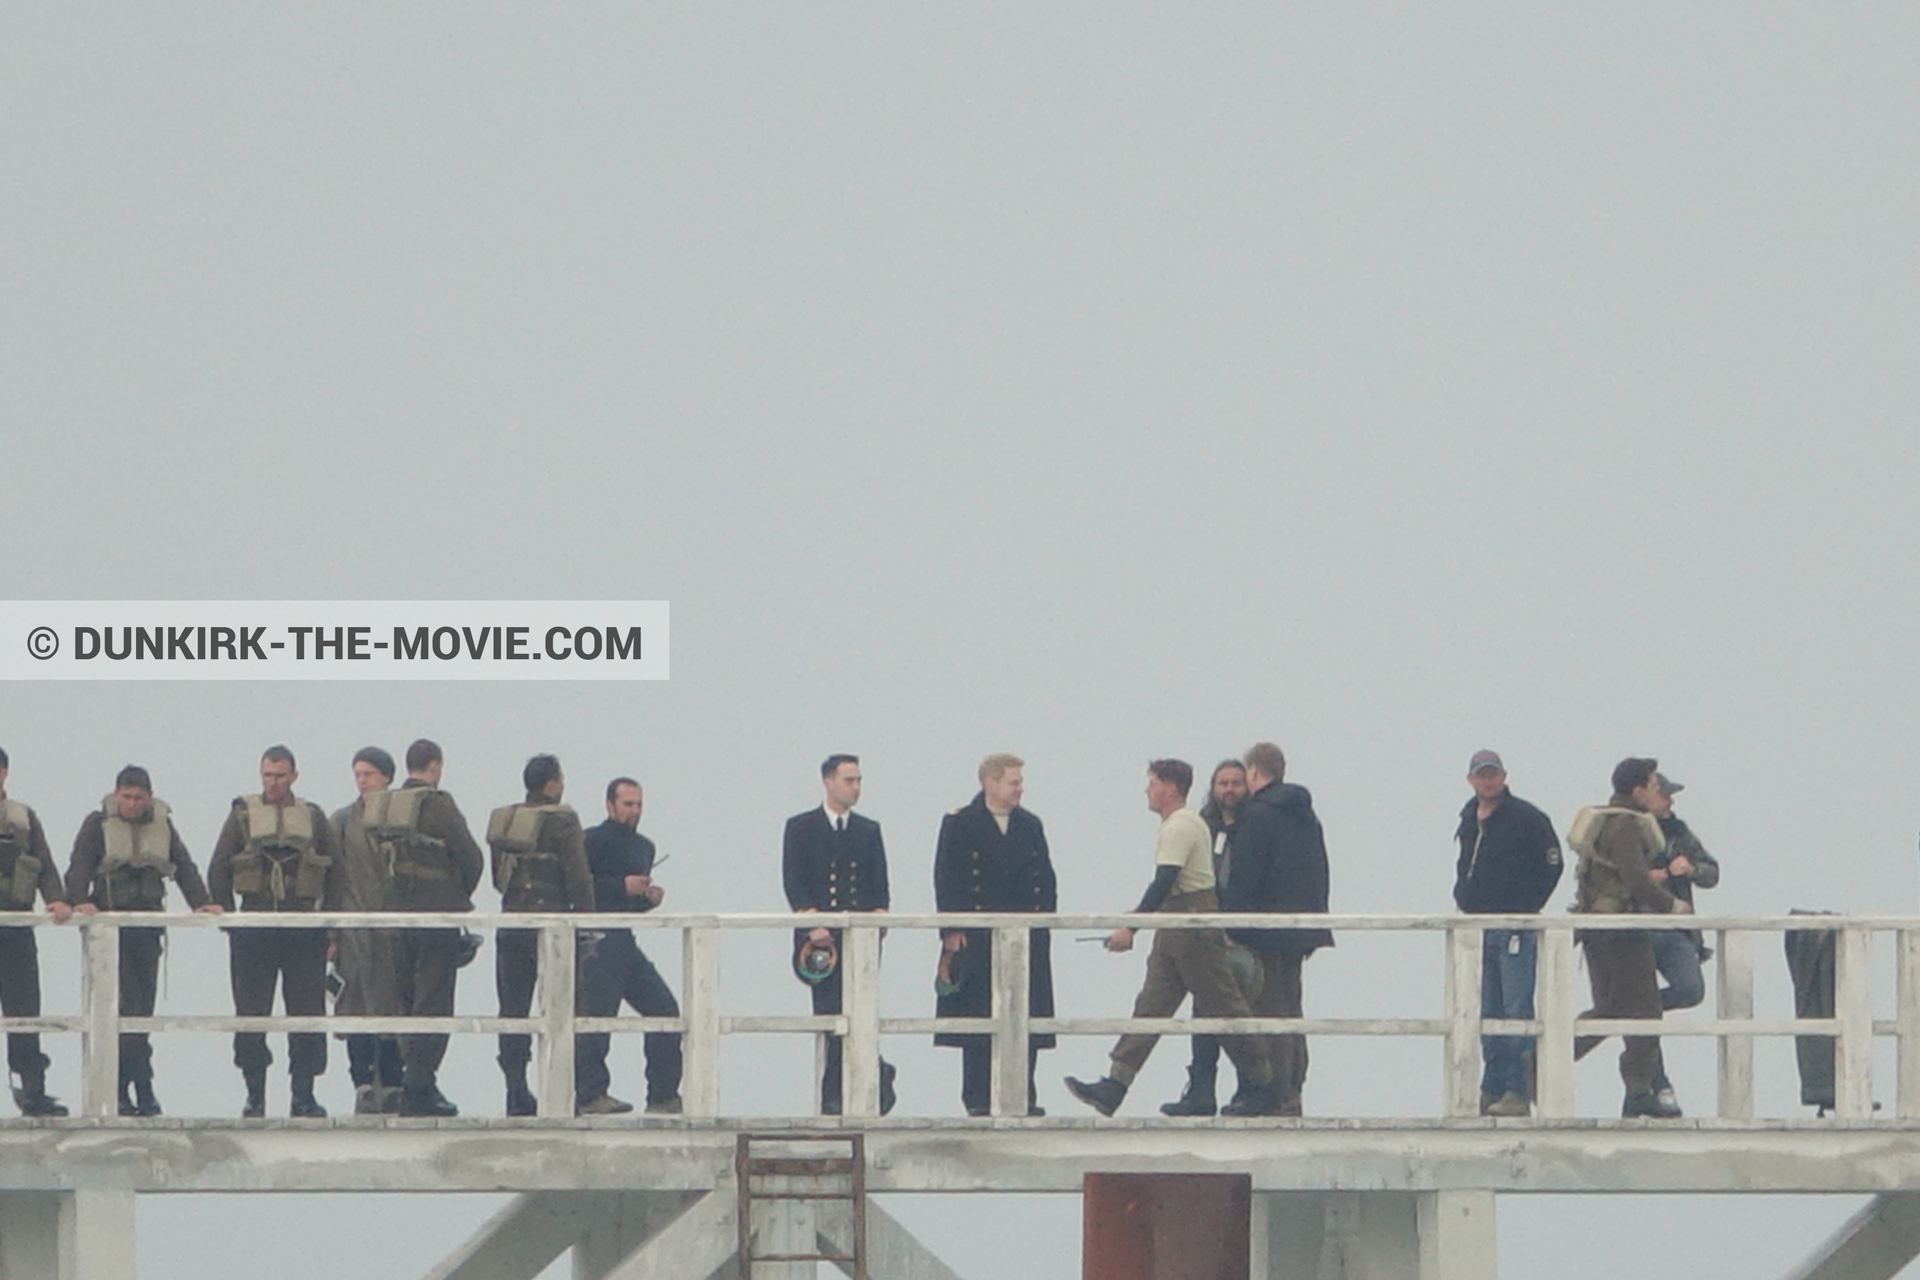 Picture with grey sky, supernumeraries, Hoyte van Hoytema, EST pier, Kenneth Branagh, Christopher Nolan, technical team,  from behind the scene of the Dunkirk movie by Nolan